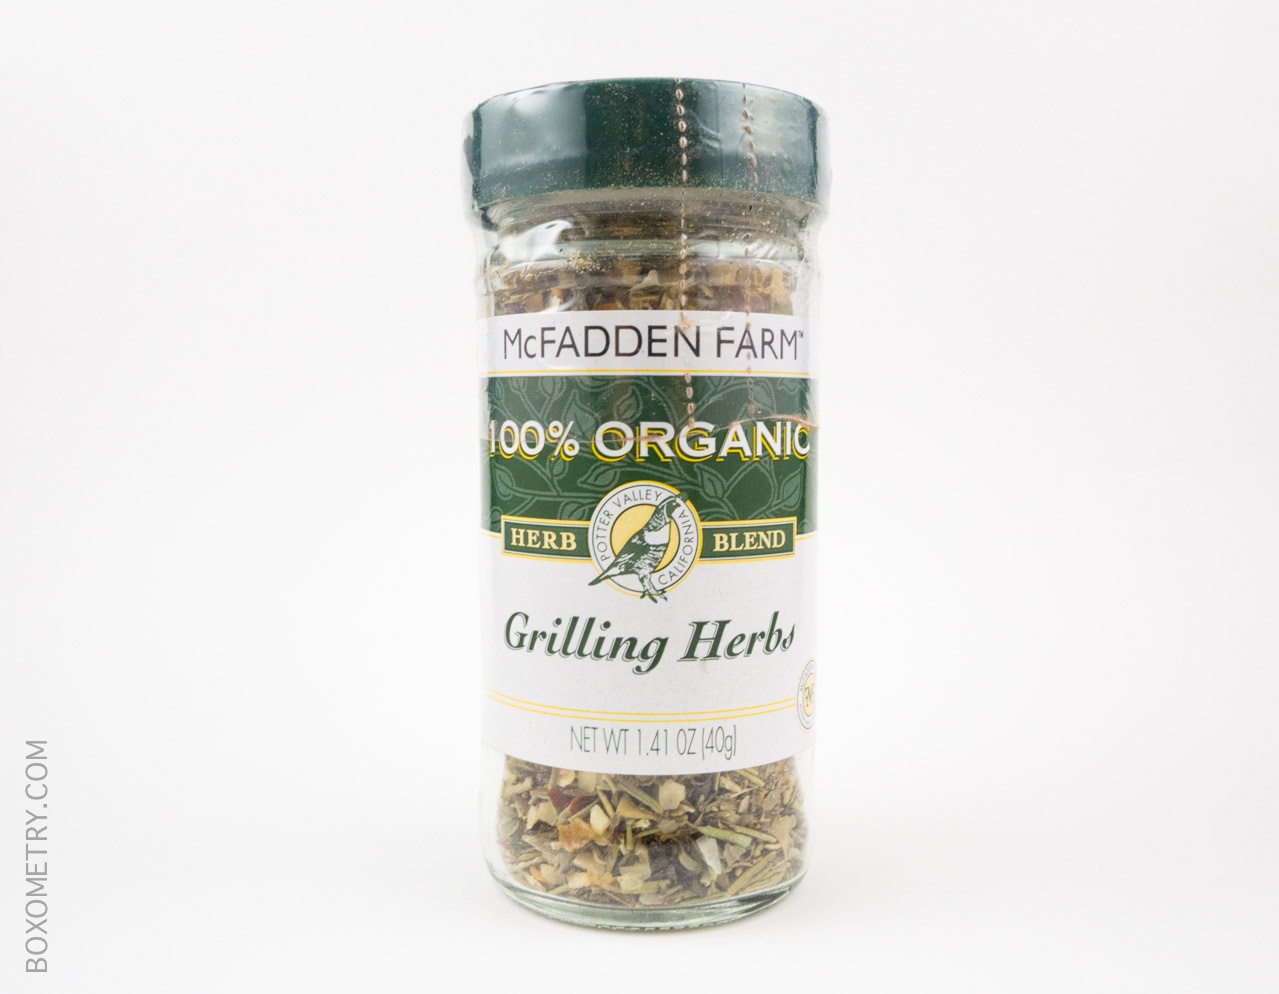 Boxometry Prospurly July 2015 Review - McFadden Farms Organic Grilling Herbs